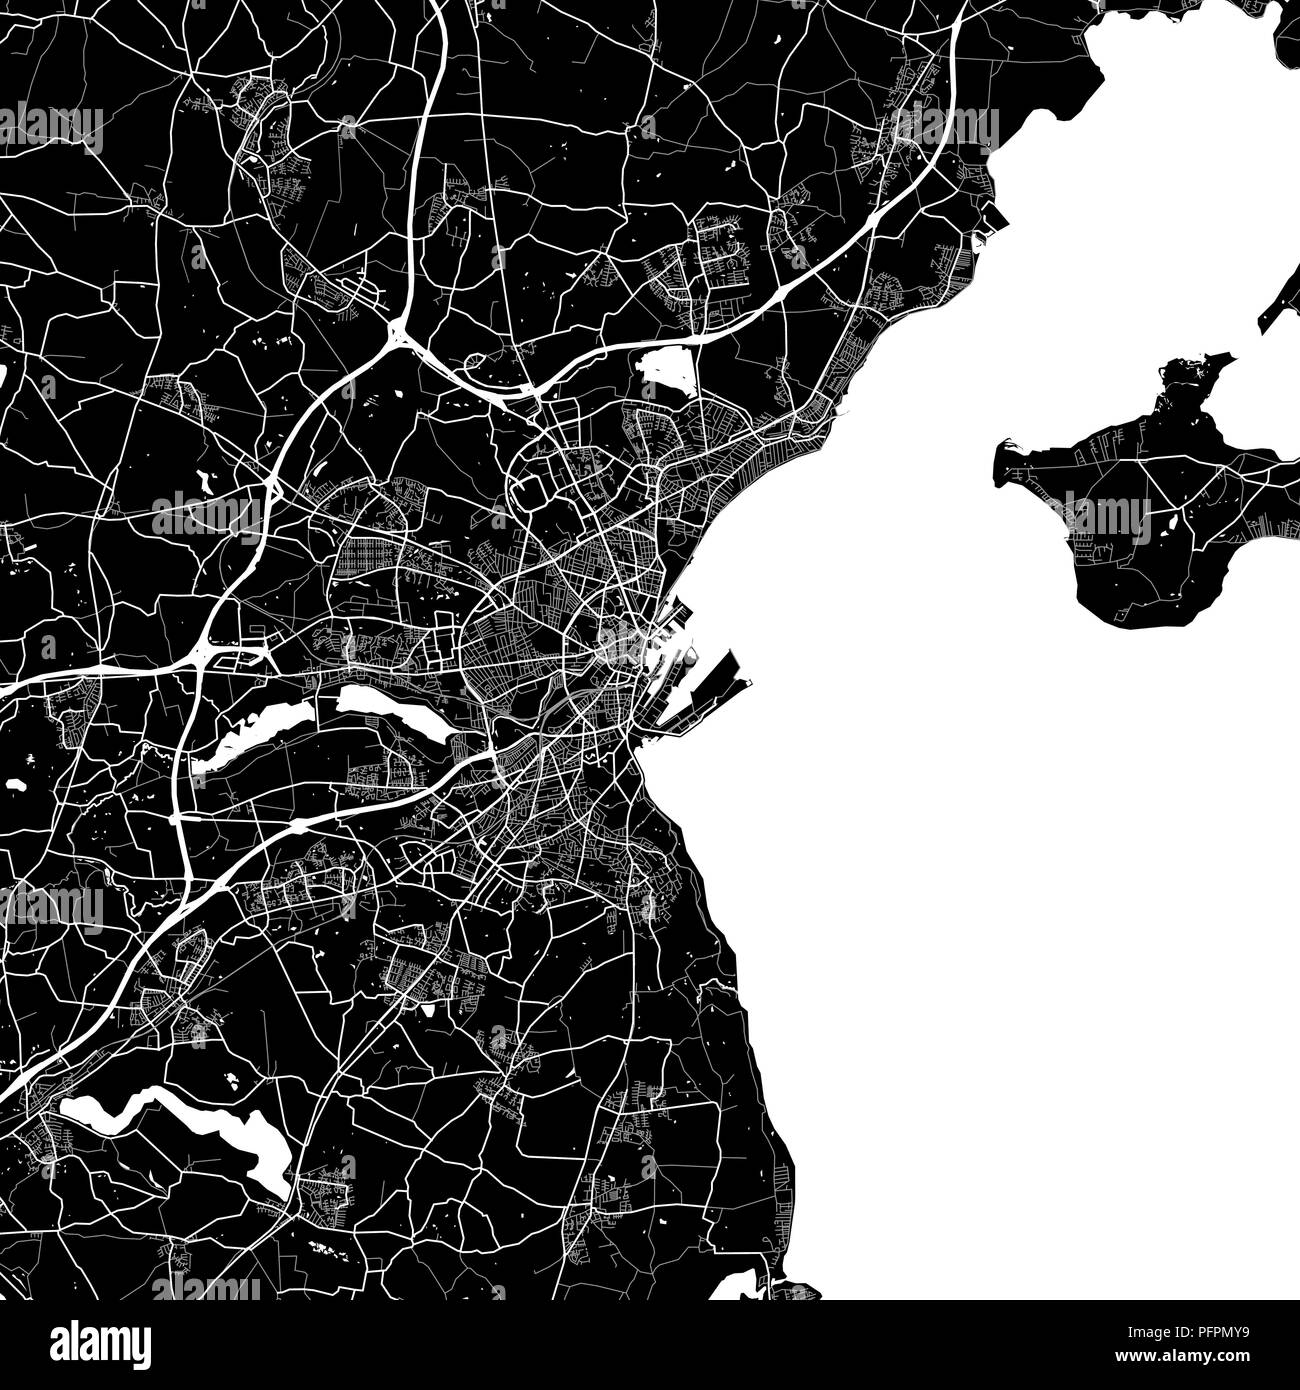 Area map of Aarhus, Denmark. Dark background version for infographic and marketing projects. This map of Aarhus, contains typical landmarks with stree Stock Vector